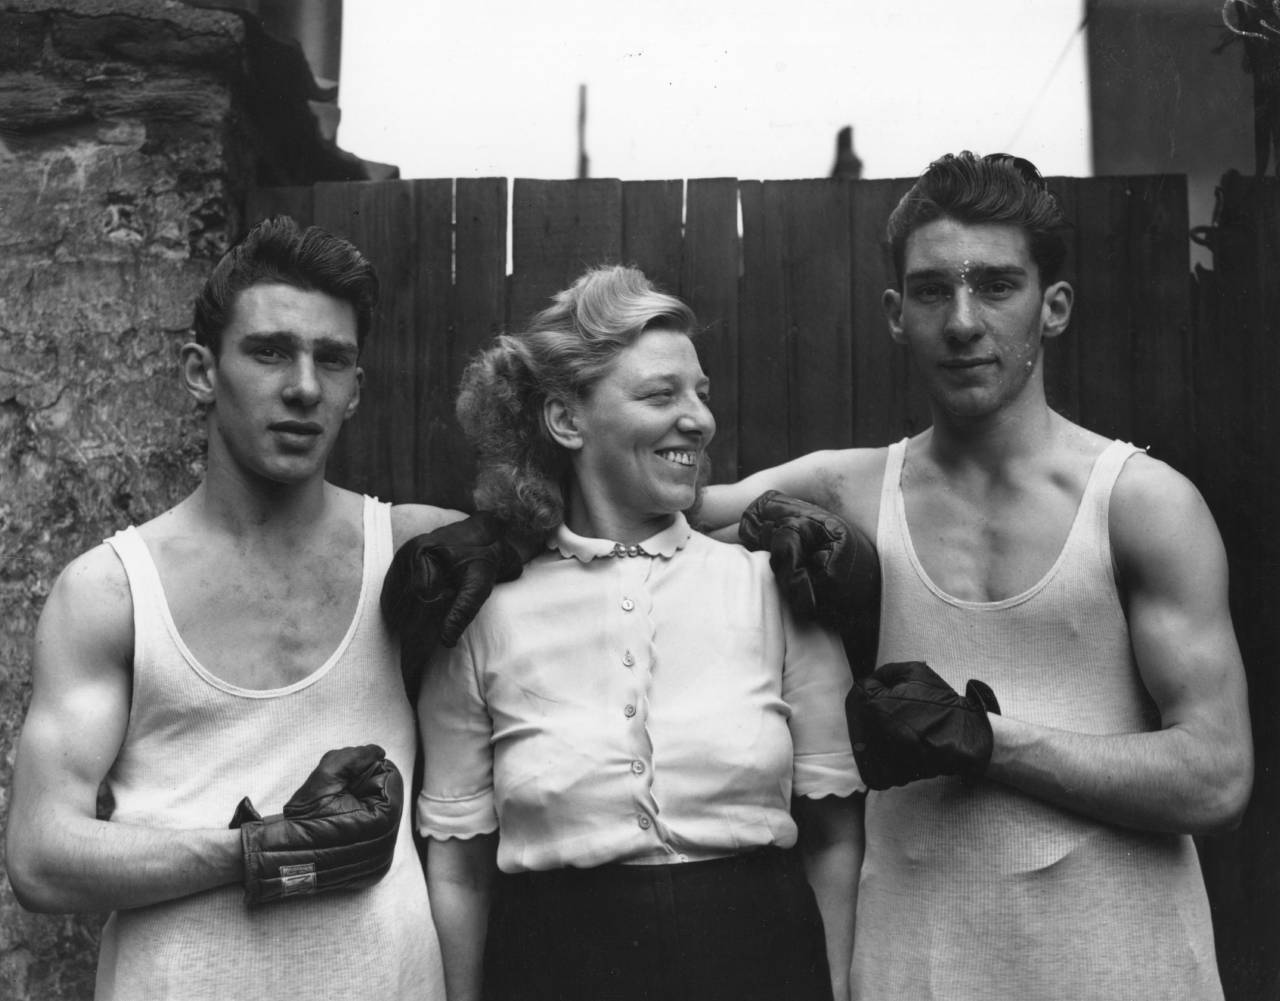 Amateur boxers Reggie (left) and Ronnie Kray with their mother Violet Kray. The Krays went on to become notorious London gangsters. (Photo by Fox Photos/Getty Images)